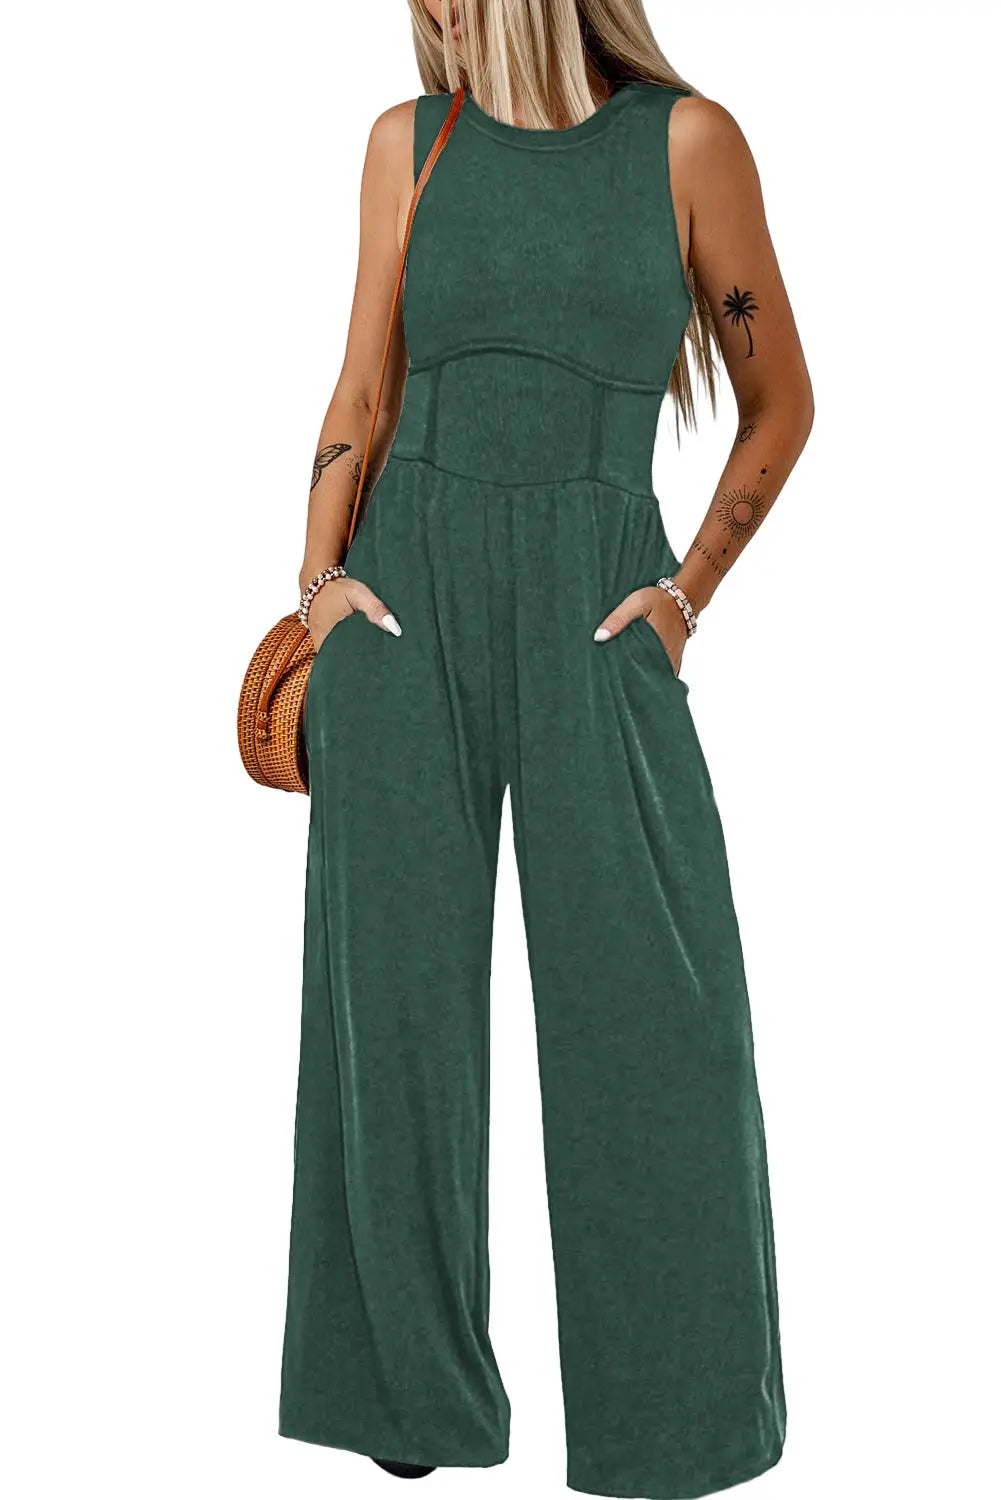 Cinched waist sleeveless wide leg jumpsuit - bottoms/jumpsuits & rompers